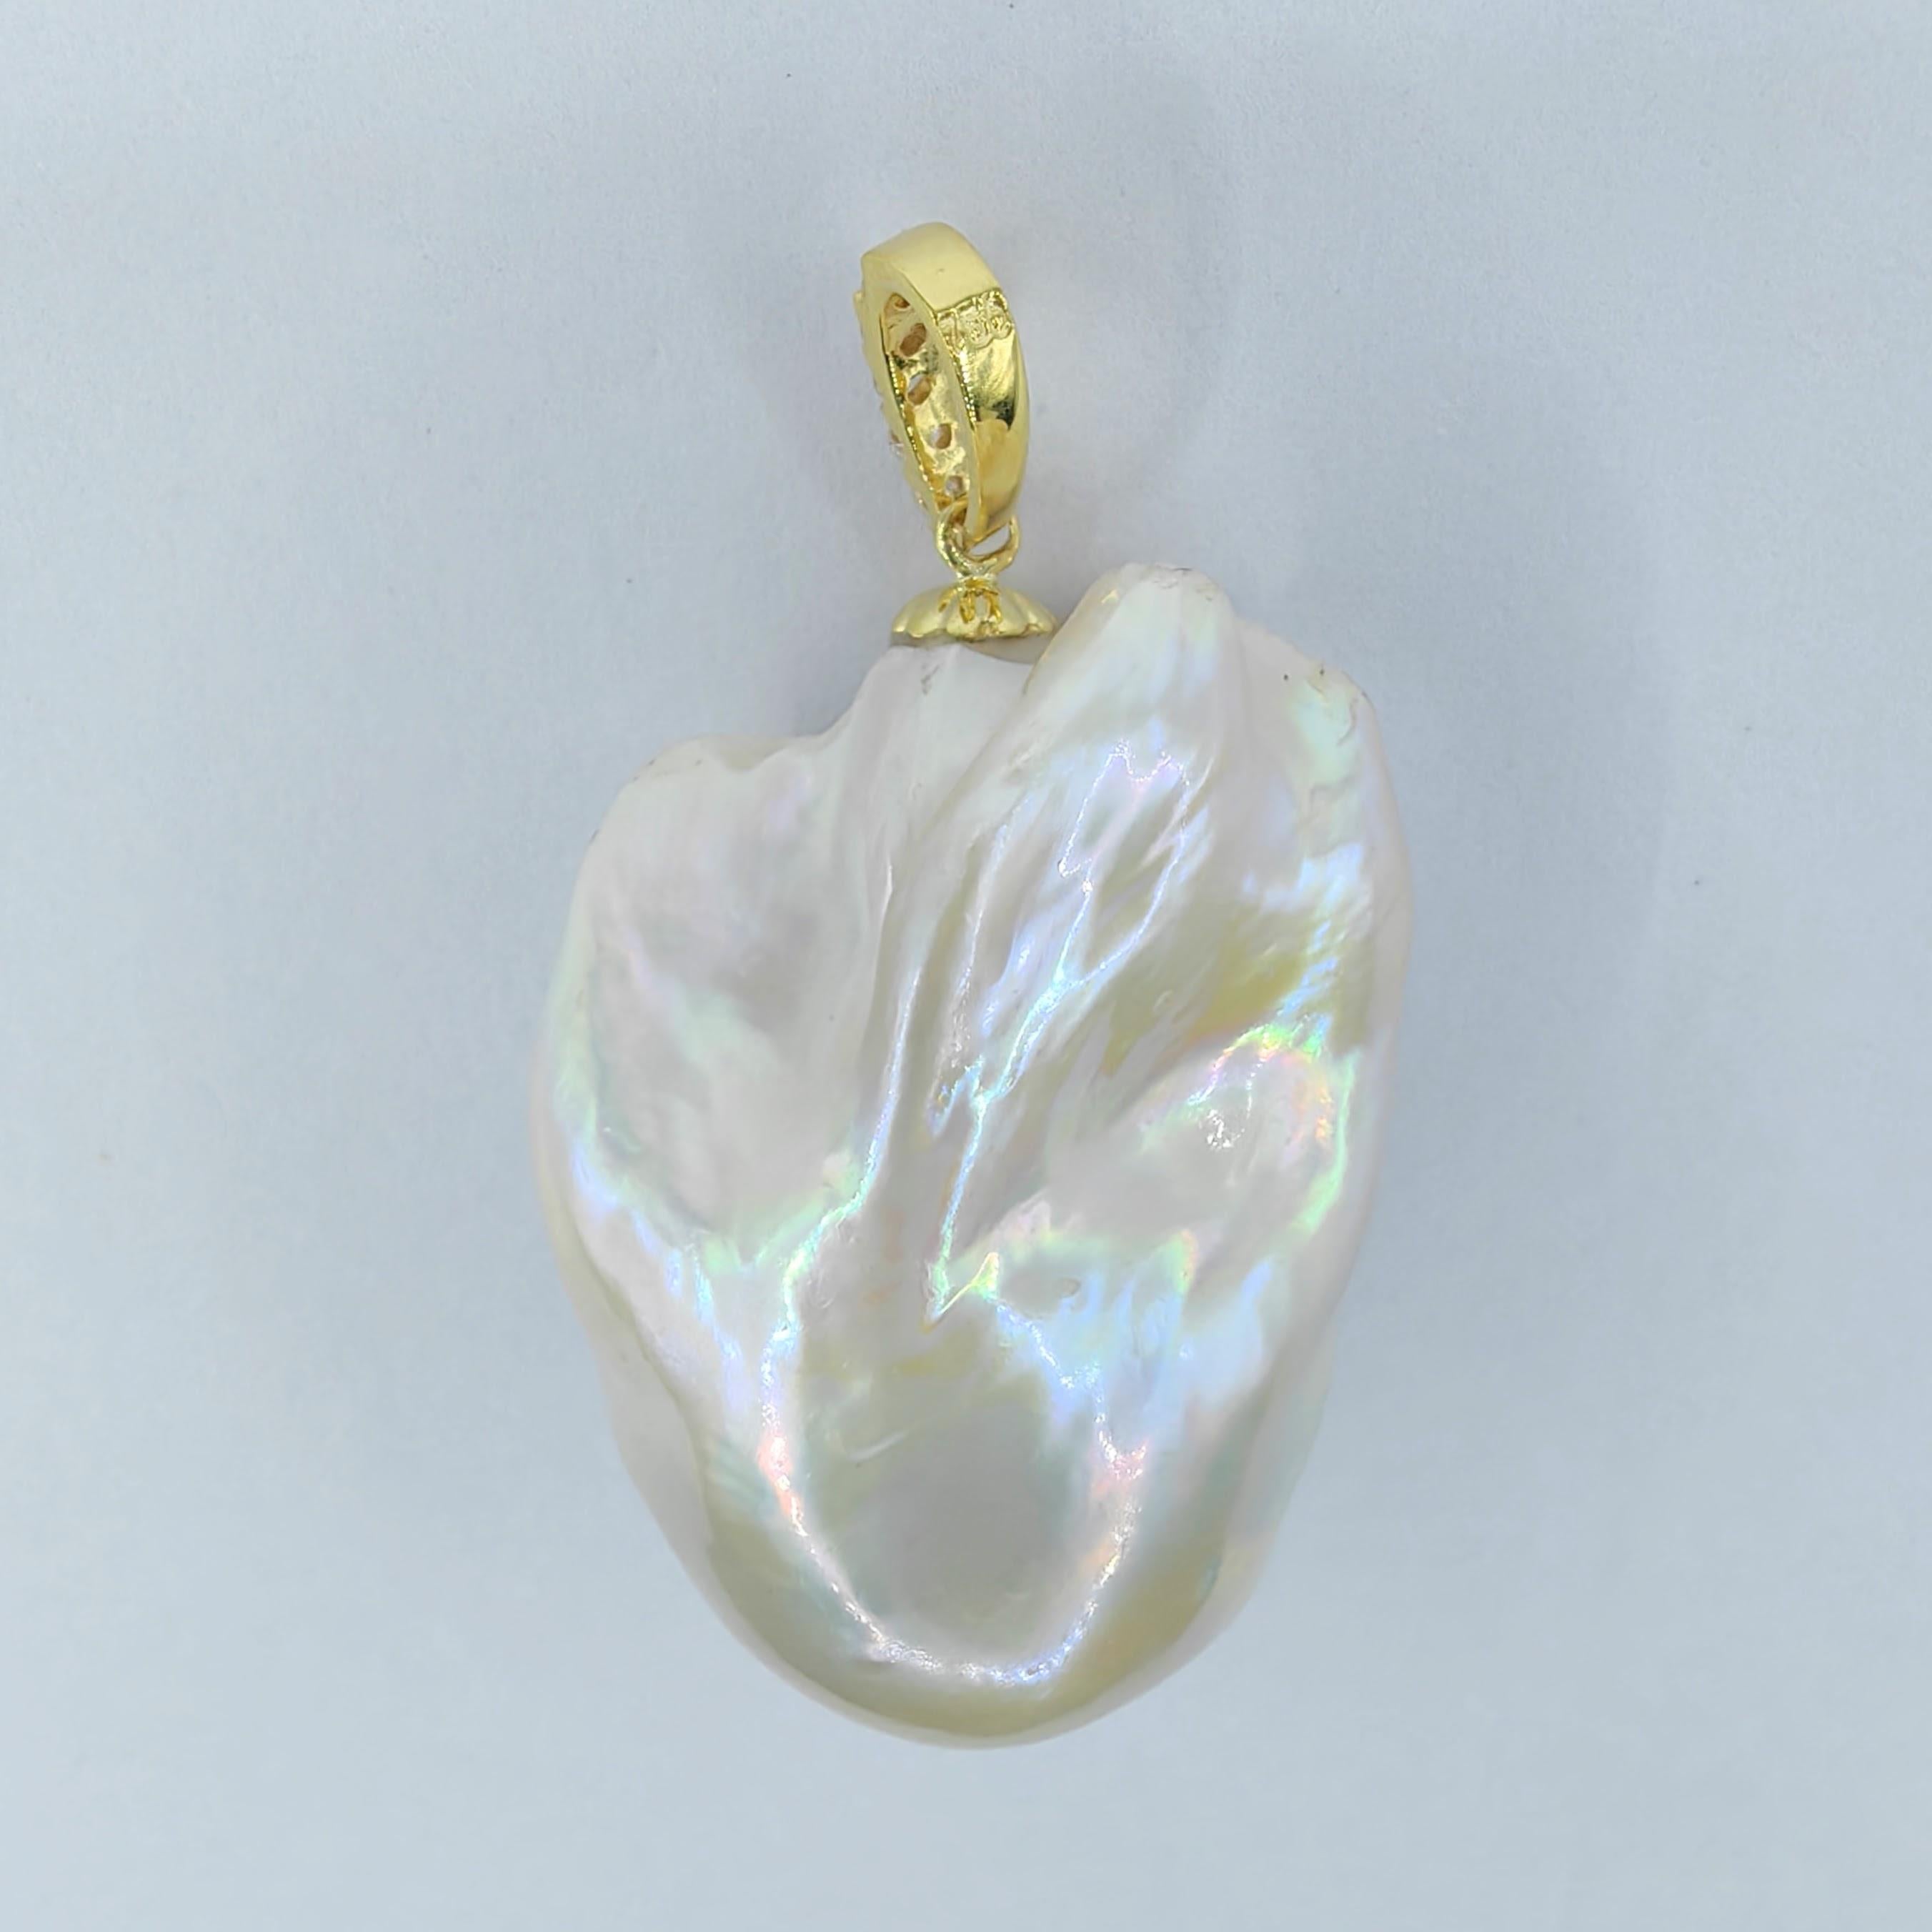 Contemporary 49.24ct Large Iridescent Baroque Pearl Diamond 18K Yellow Gold Necklace Pendant For Sale